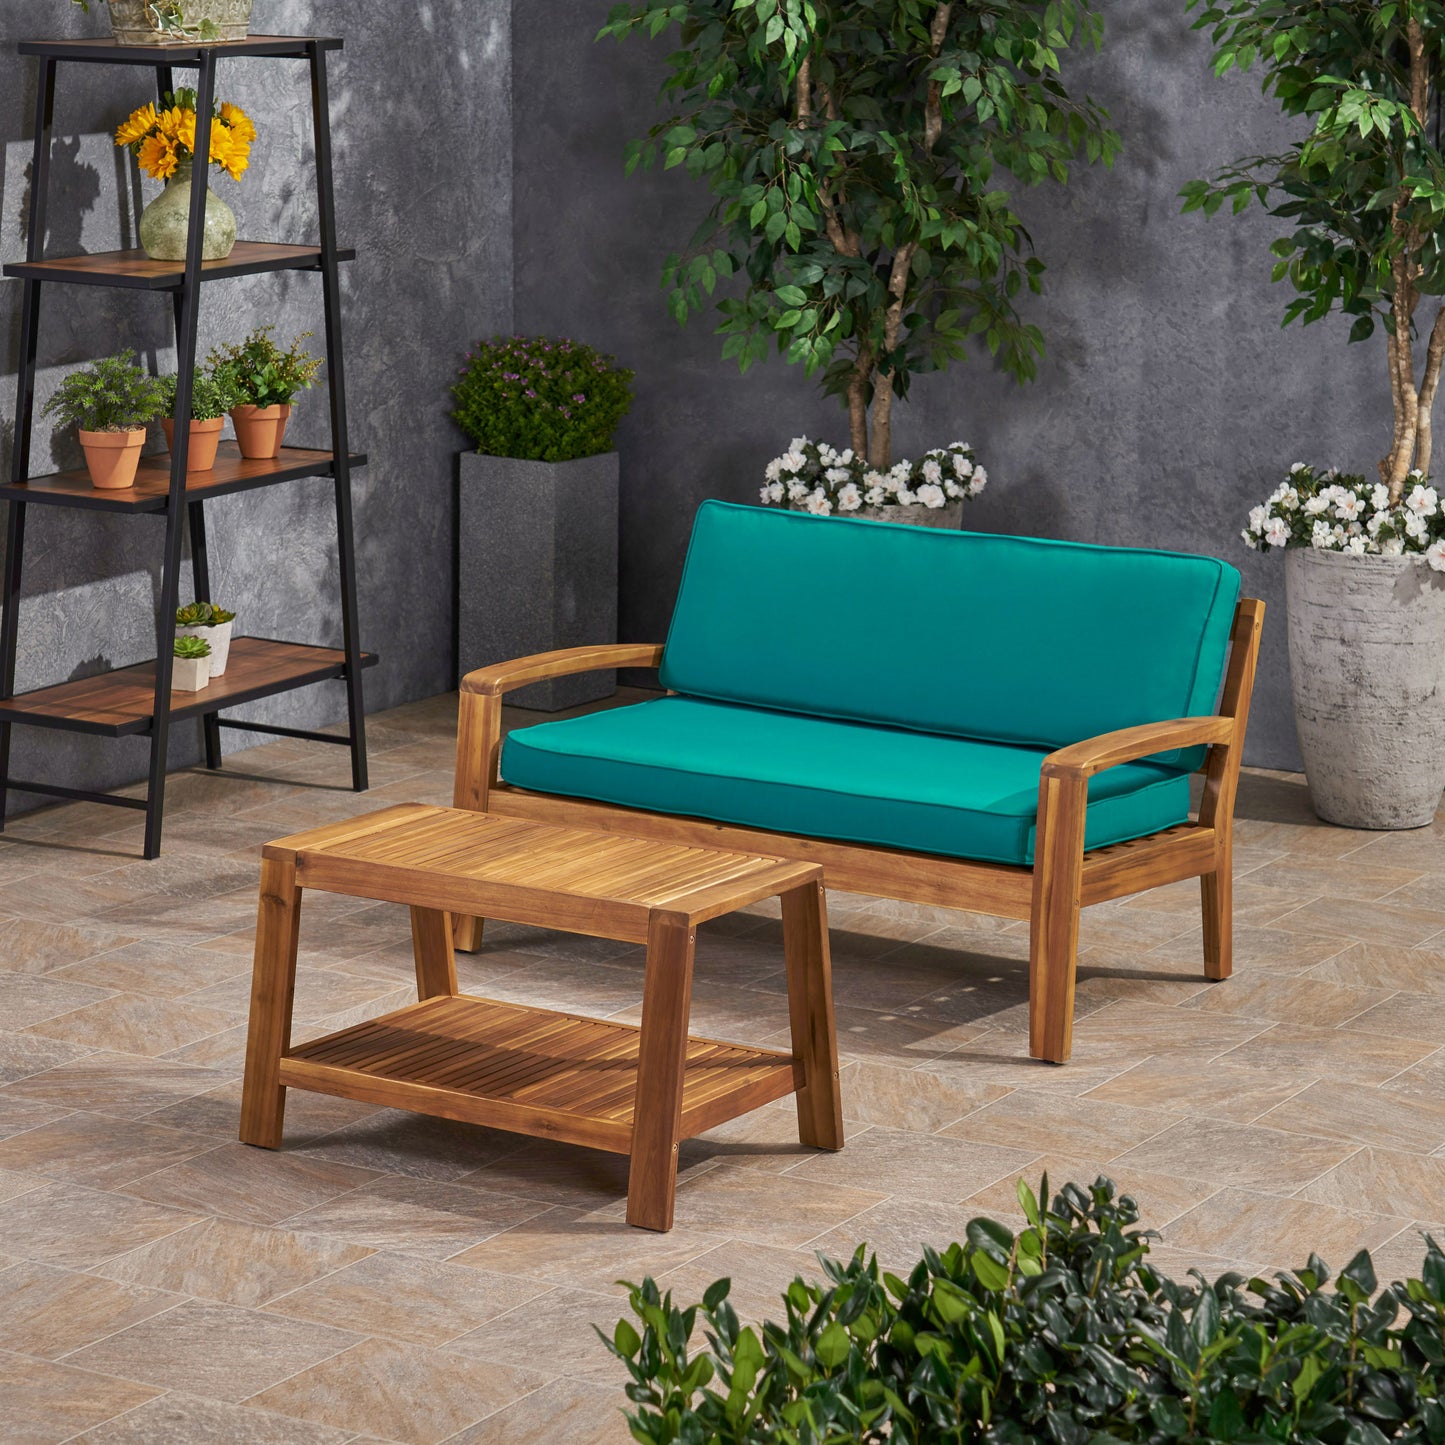 Parma Outdoor Acacia Wood Loveseat and Coffee Table Set with Sunbrella Cushions